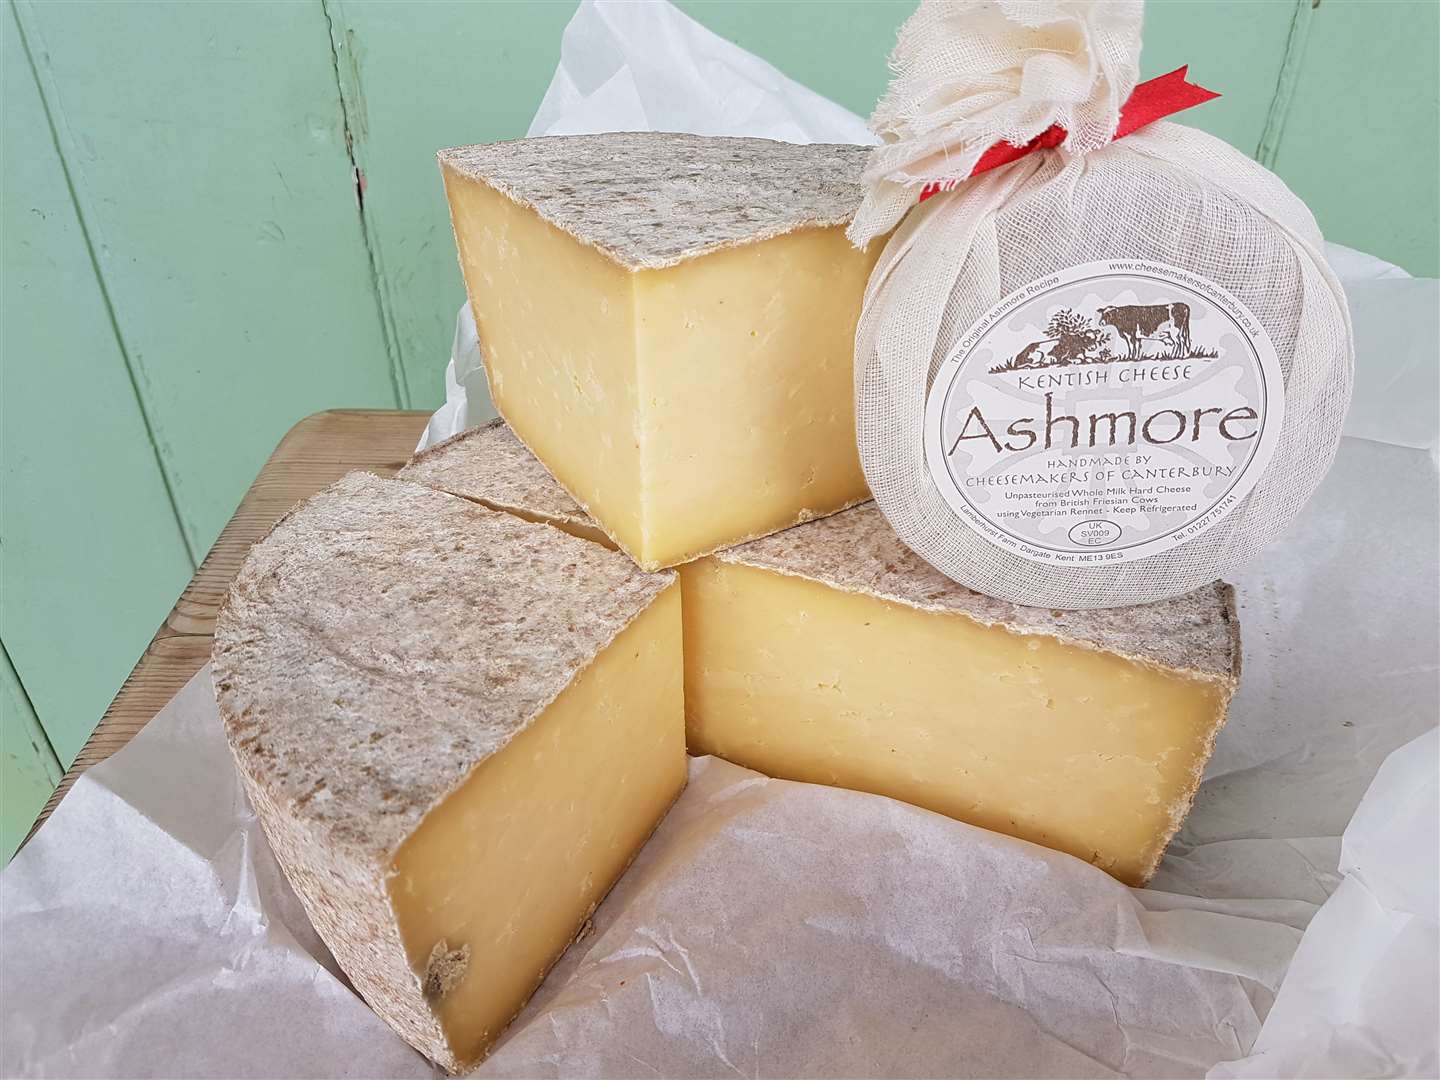 The award-winning Cheesemakers of Canterbury will be at the festival this year